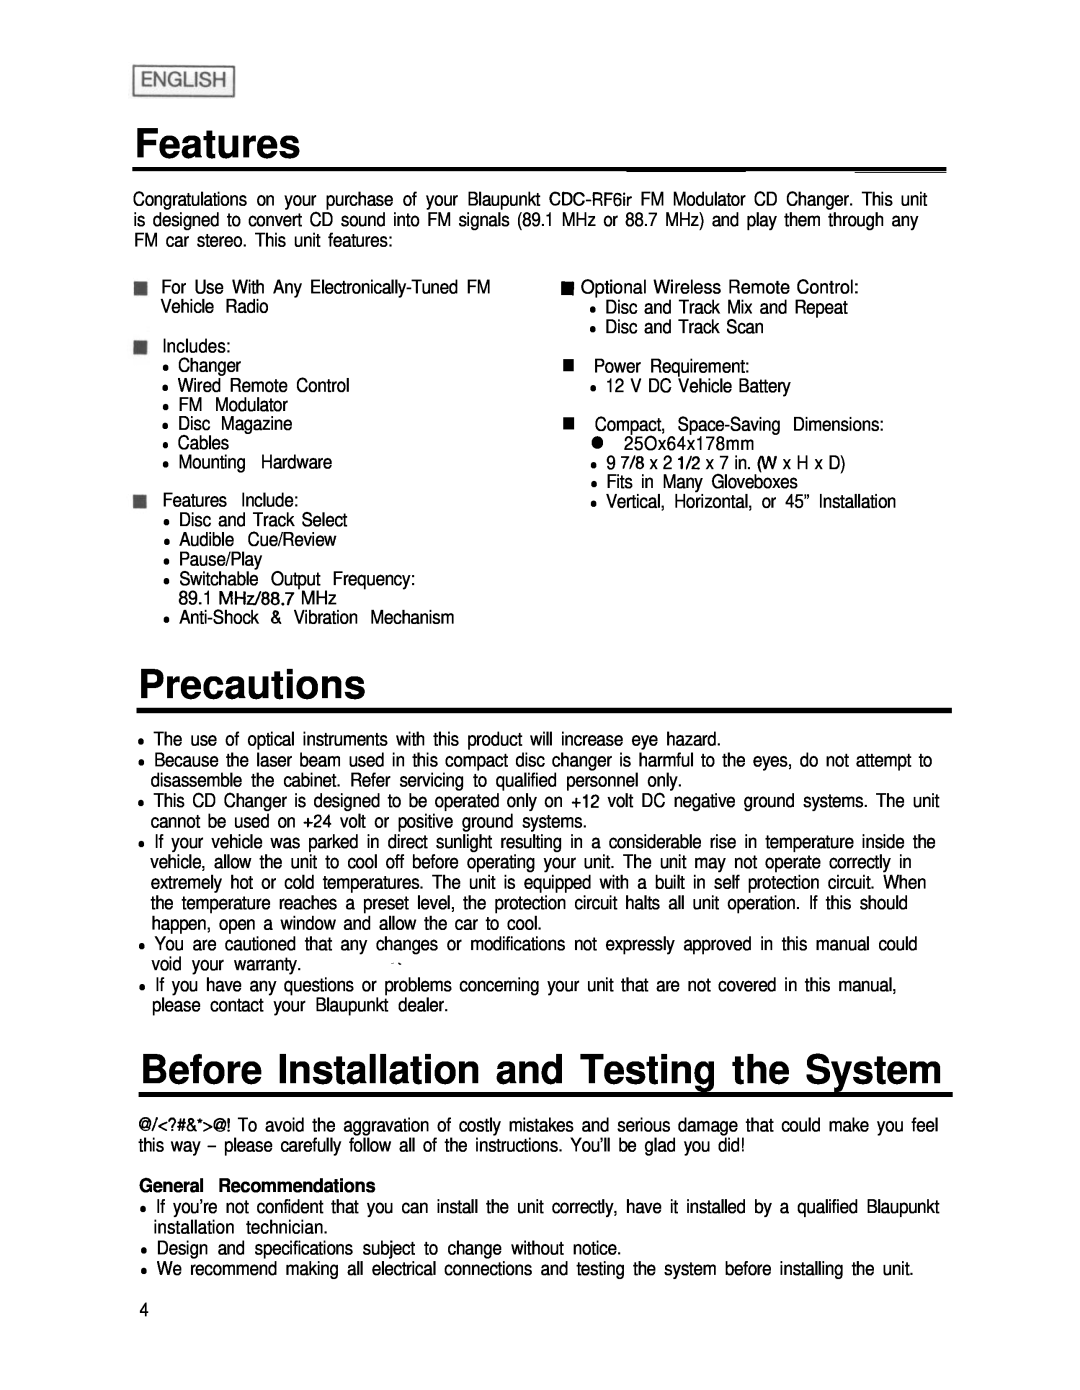 Blaupunkt CDC-RF6IR manual Features, Precautions, Before Installation and Testing the System, General Recommendations 